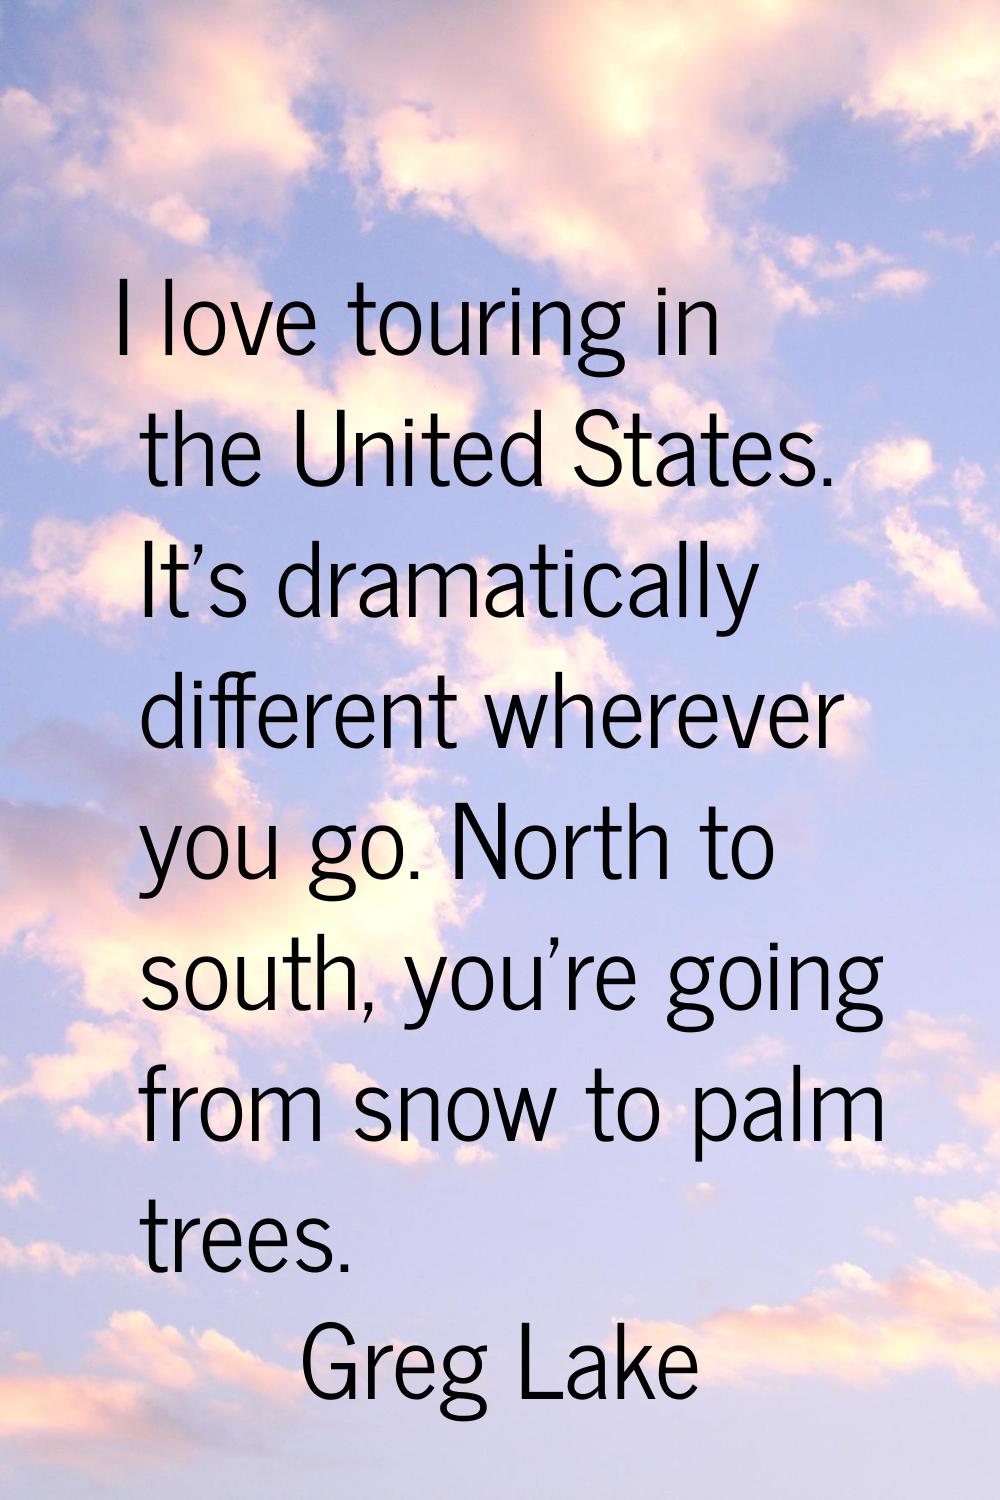 I love touring in the United States. It's dramatically different wherever you go. North to south, y